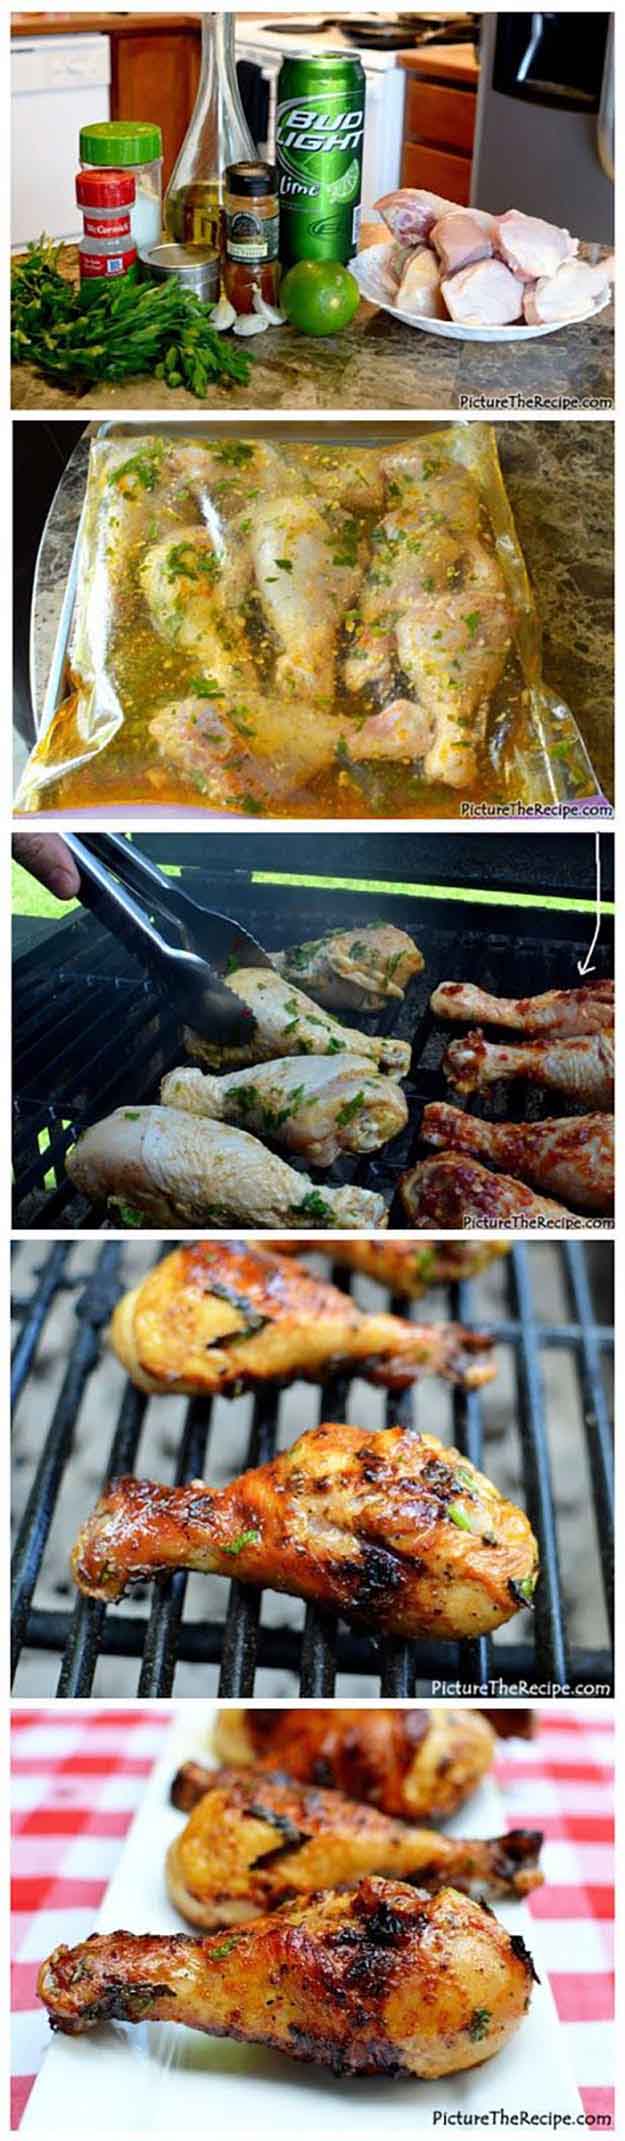 Quick Healthy Chicken Grilling Recipes | Easy Meat BBQ Recipe Ideas | Grilled Lime Chili Chicken Legs | DIY Projects & Crafts by DIY JOY at http://diyjoy.com/grilling-recipes-diy-bbq-ideas